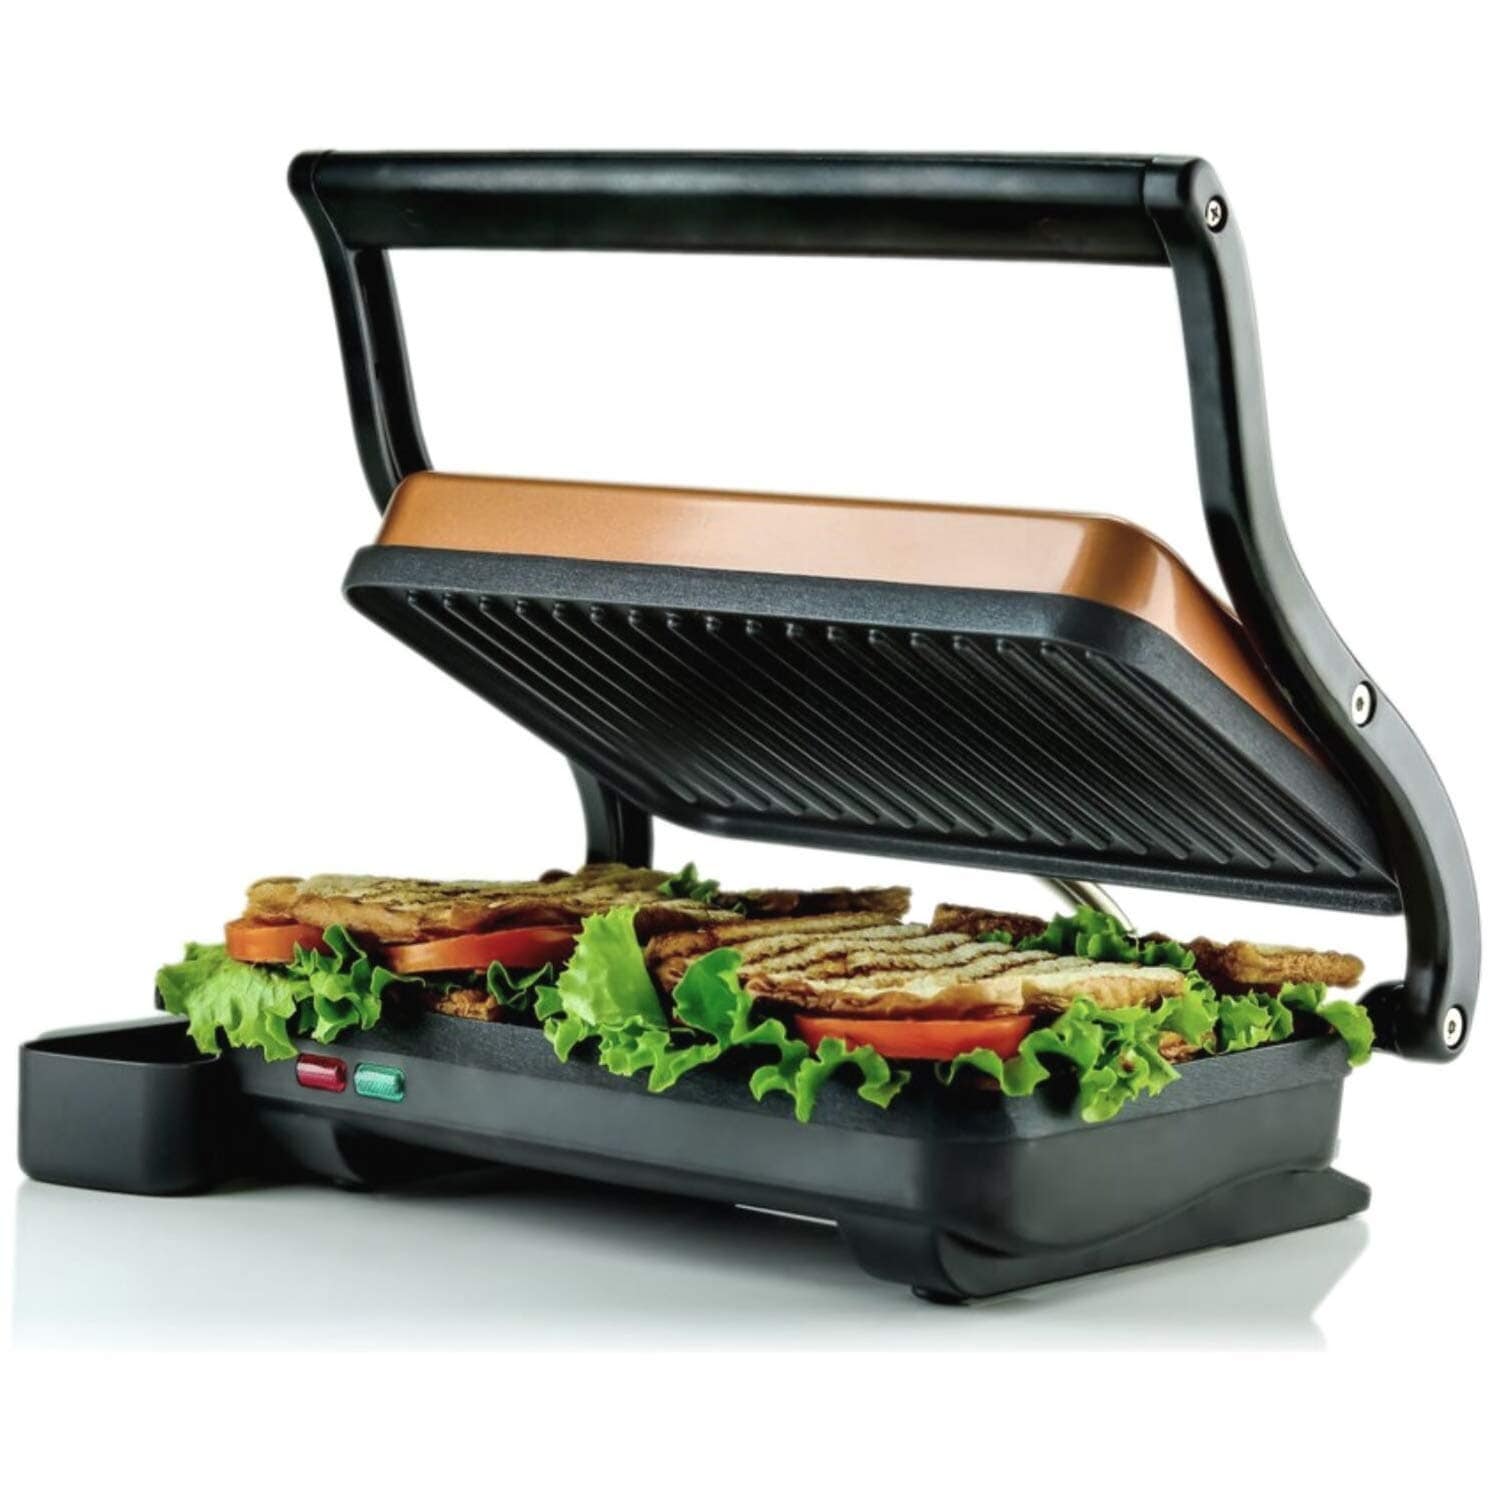 https://ak1.ostkcdn.com/images/products/is/images/direct/ba2bab2c764be307cb95c743c6580cd6457f4a6c/Ovente-GP0620-2-Electric-Panini-Press-Grill-%26-Gourmet-Sandwich-Maker.jpg